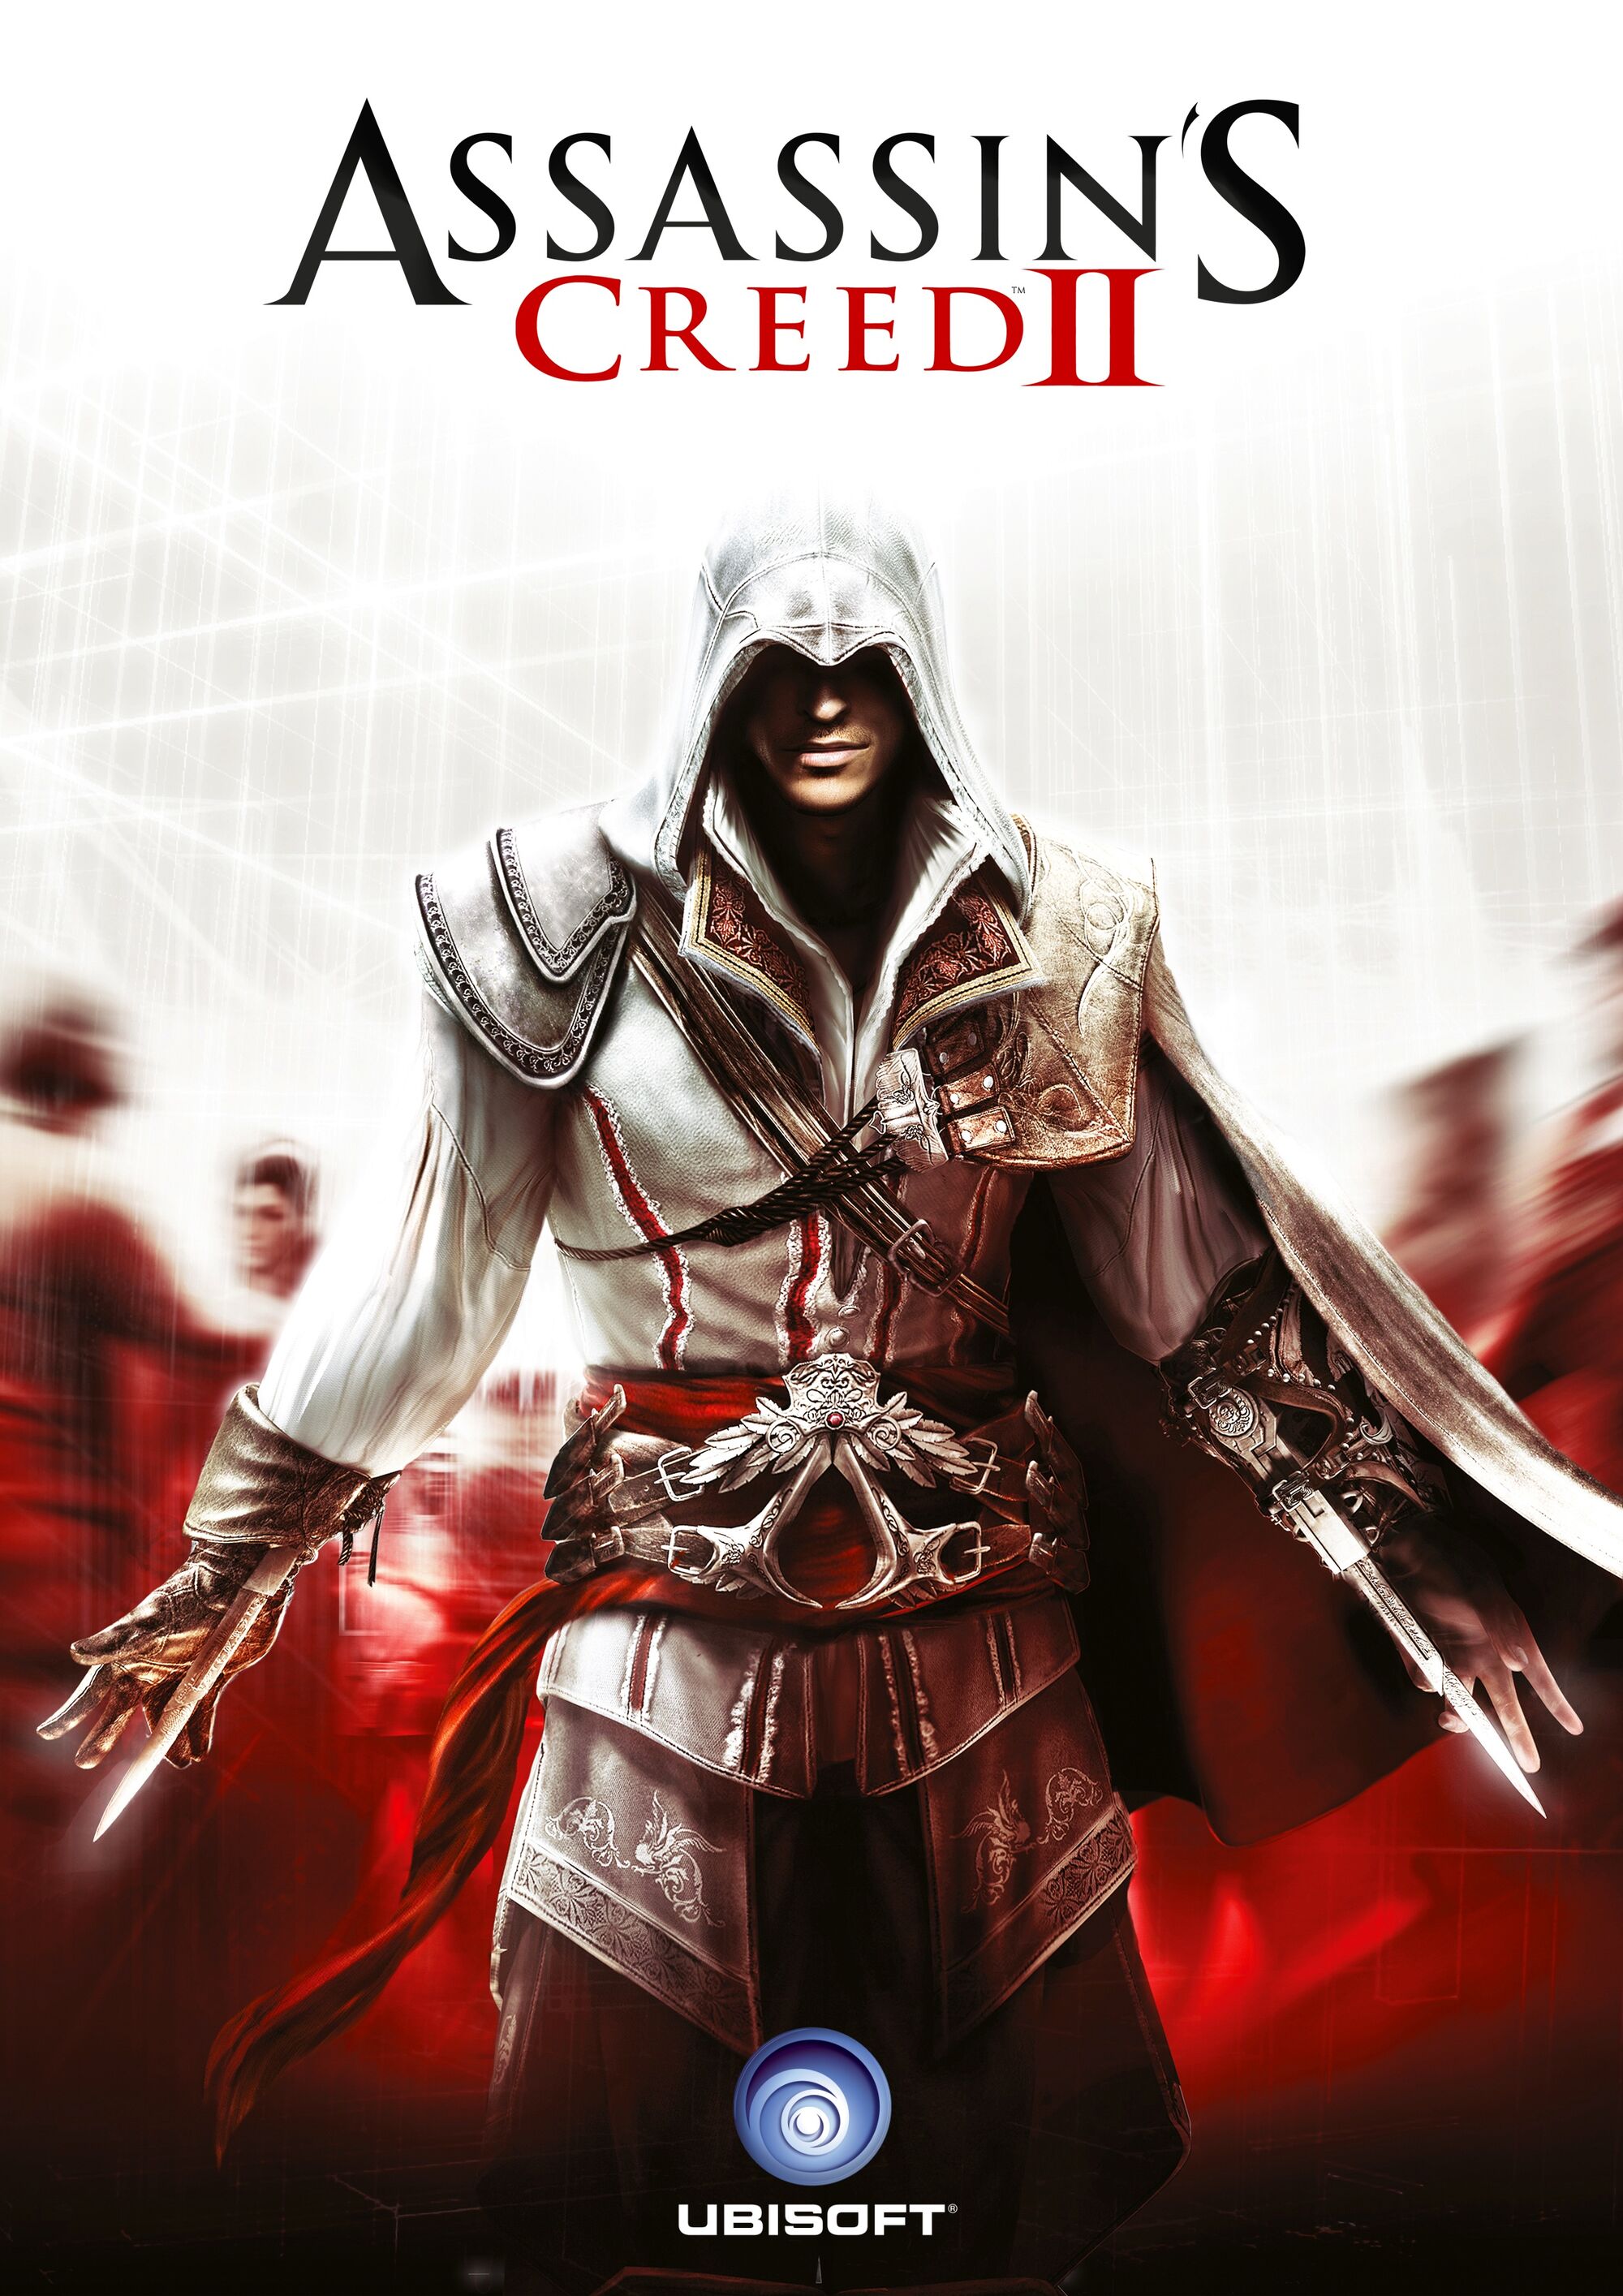 "My name is Ezio Auditore Da Firenze and as my father before me I am an assassin ”